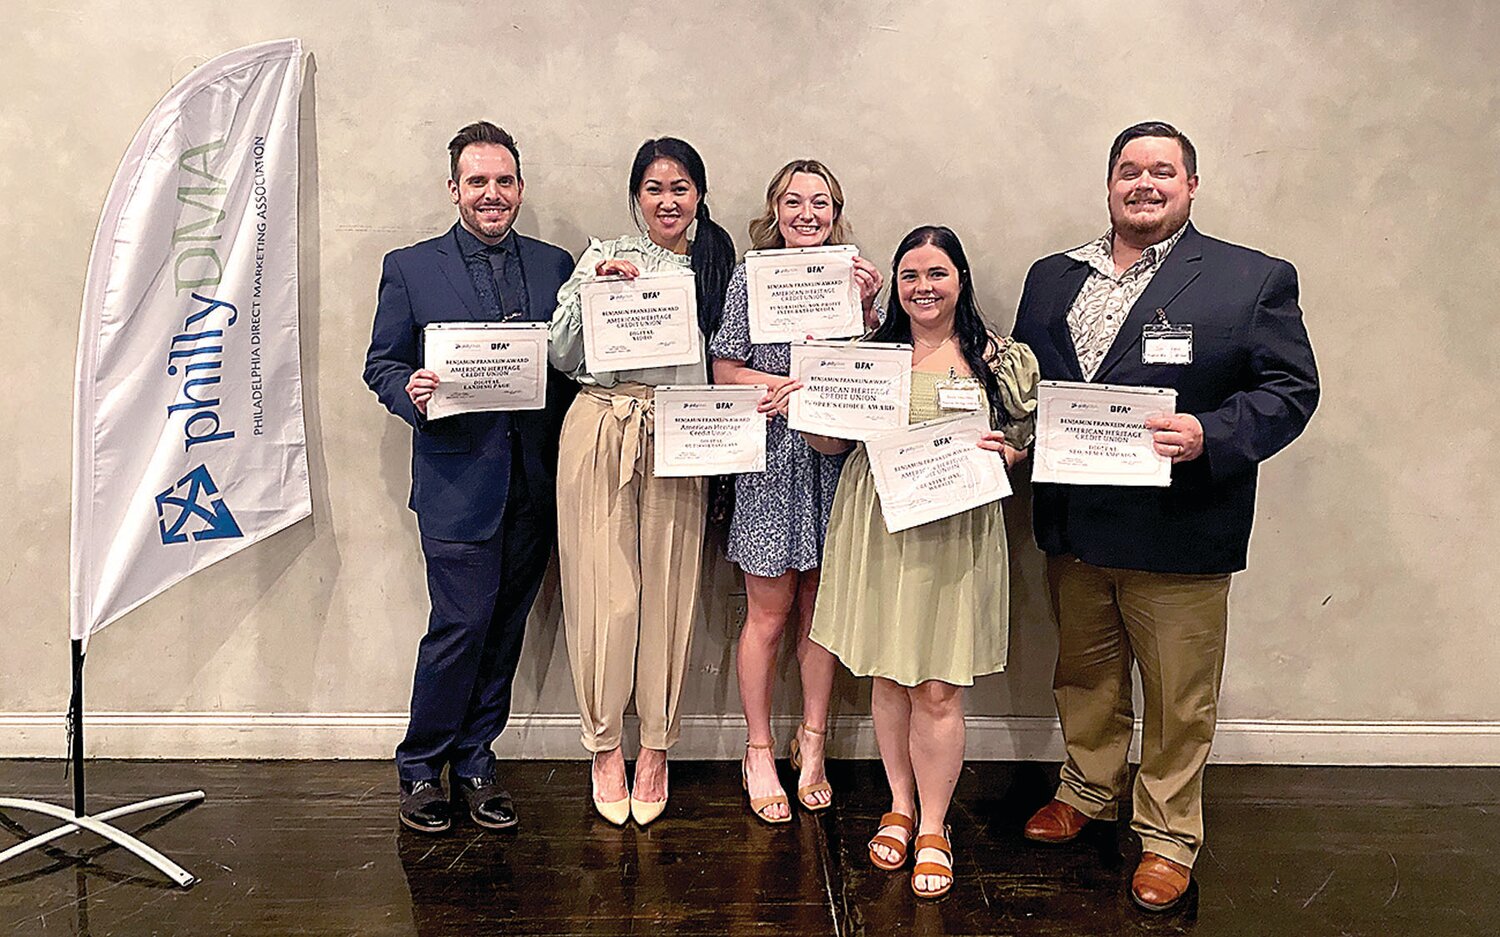 American Heritage’s Marketing Team members display seven Benny Awards for marketing, community outreach, and business development excellence.